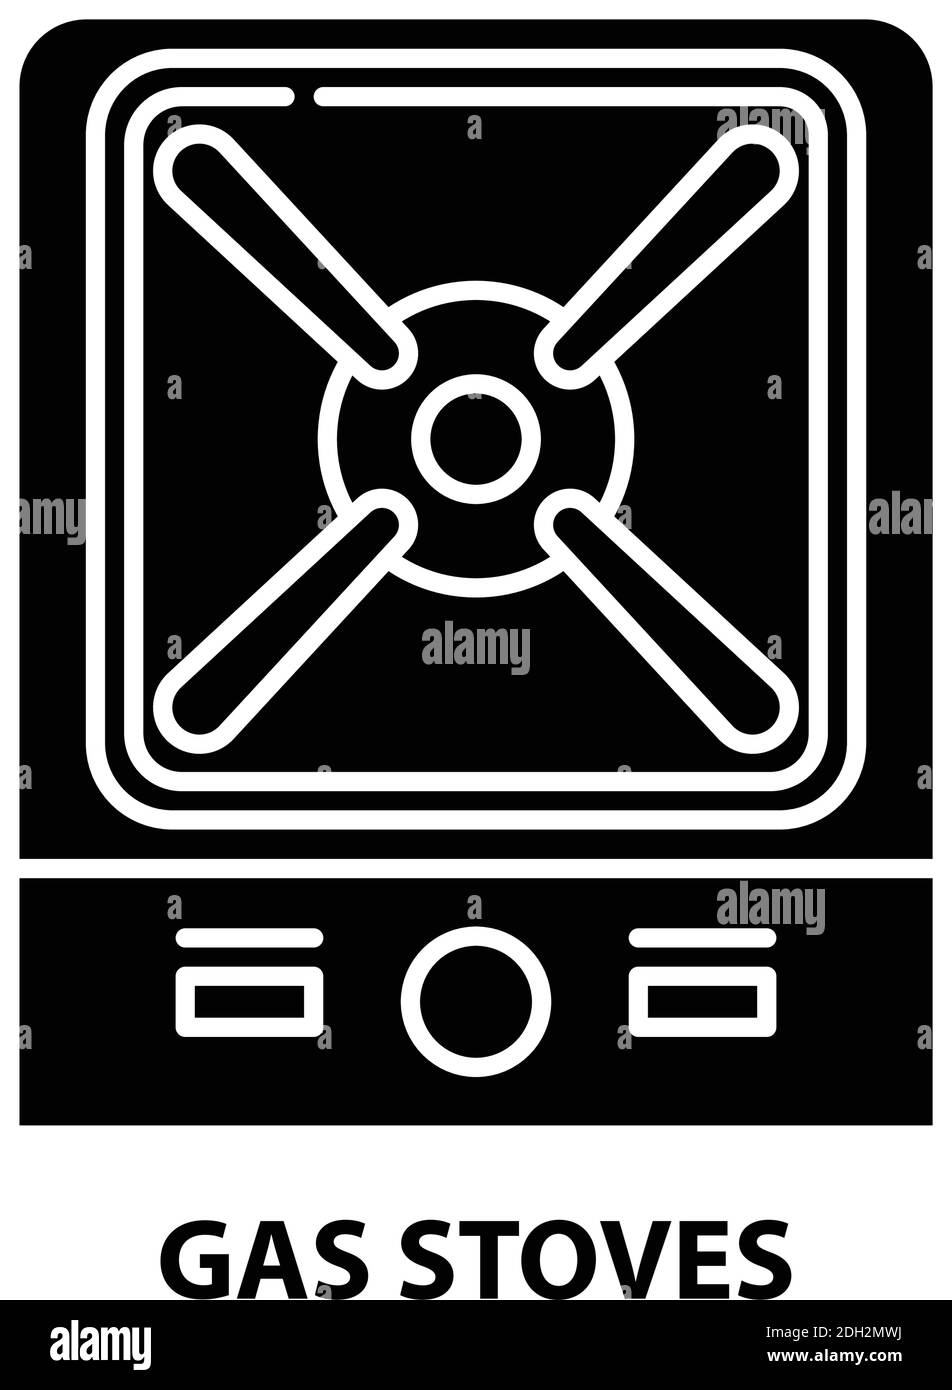 gas stoves icon, black vector sign with editable strokes, concept illustration Stock Vector